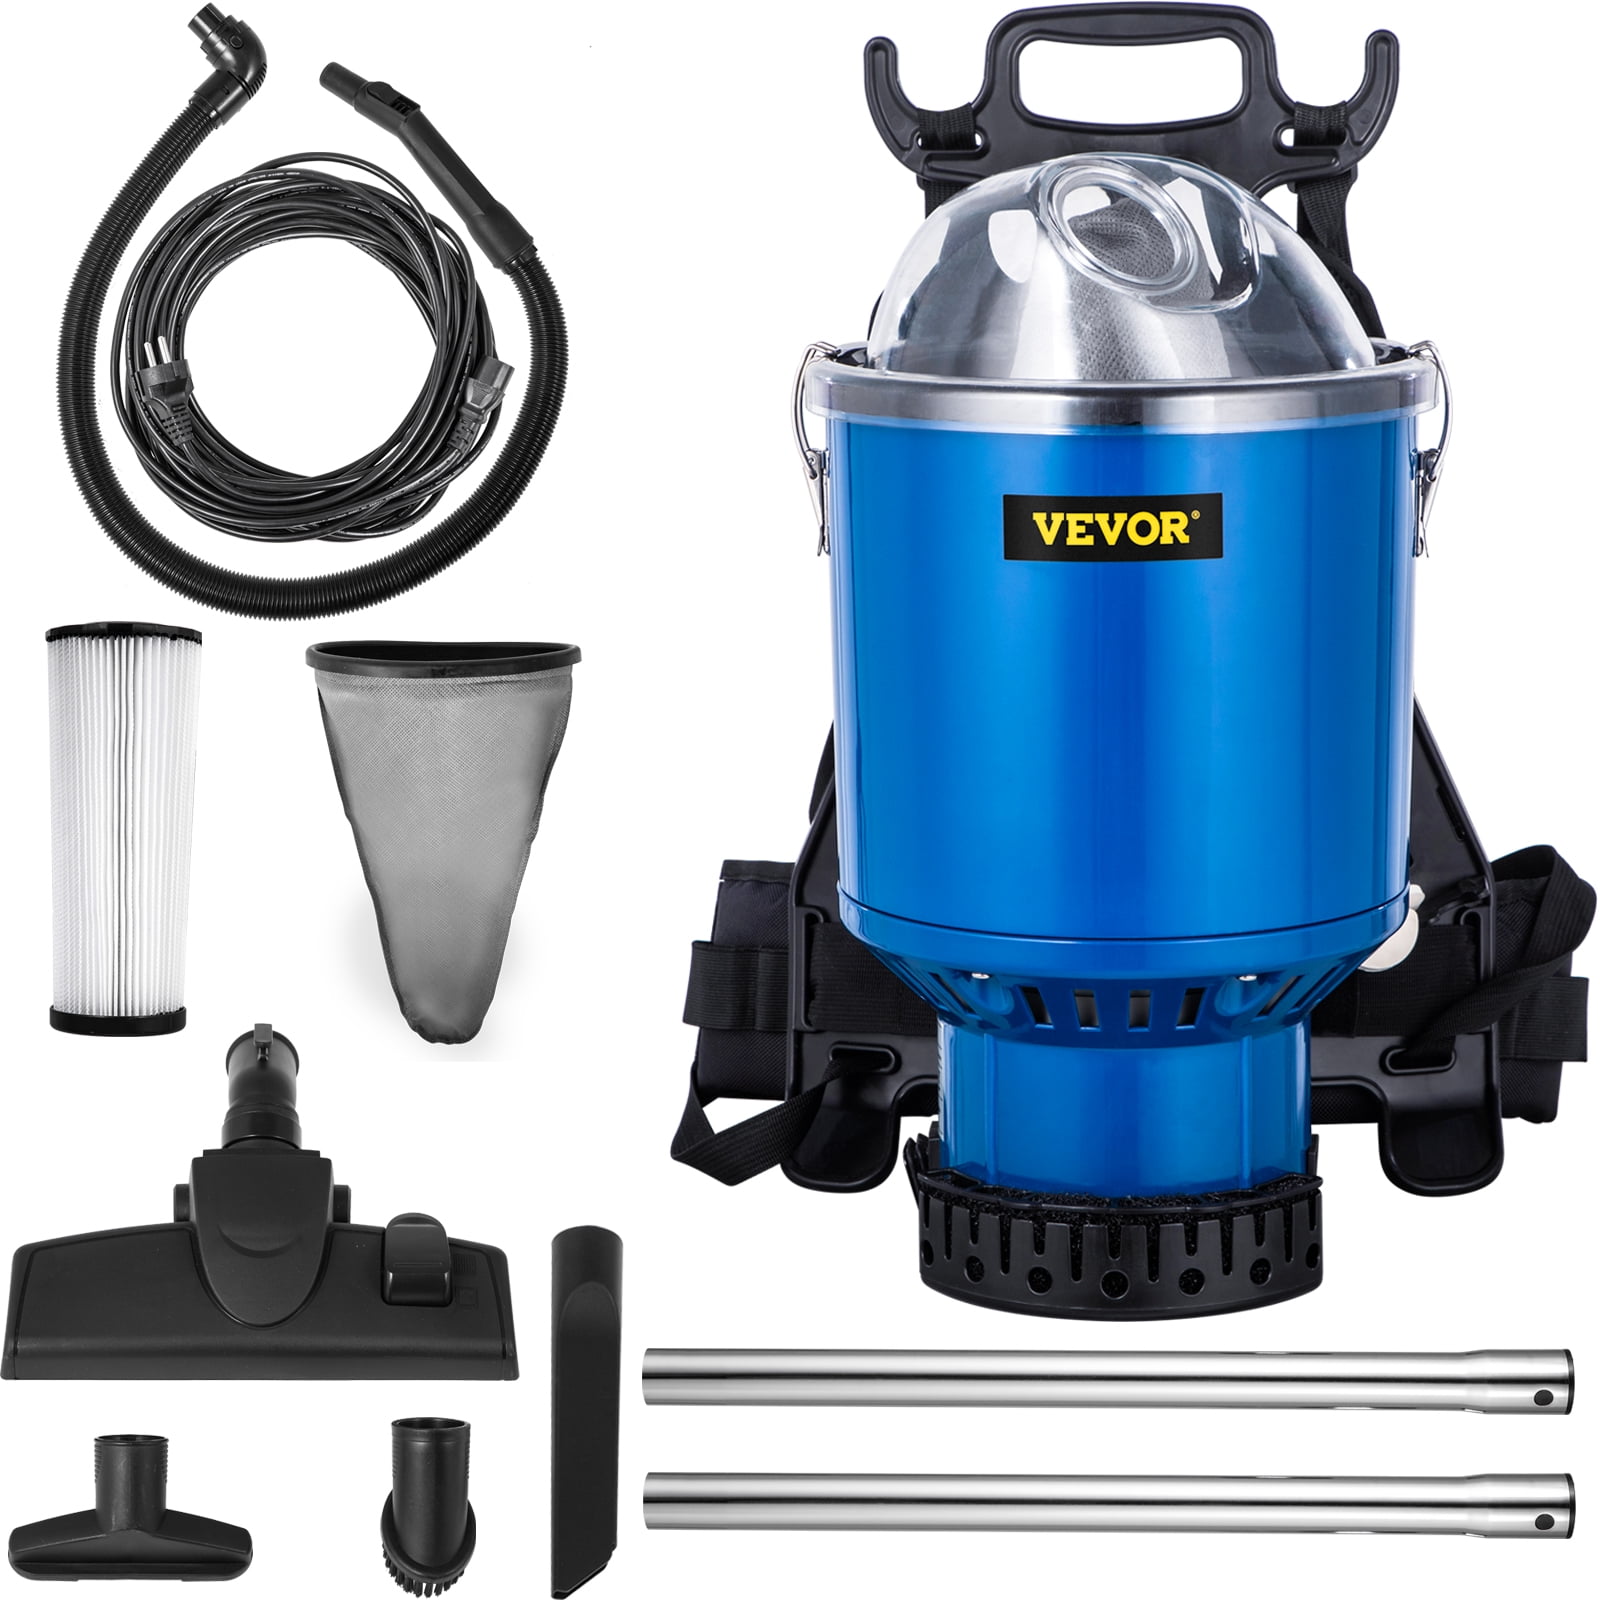 VEVOR Dust Extractor, 8 Gallon Wet & Dry HEPA Filter, Automatic Dust  Cleaning, 1200W Powerful Motor Vacuum Cleaner,Heavy-Duty Shop Vacuum with  Attachments, VE…